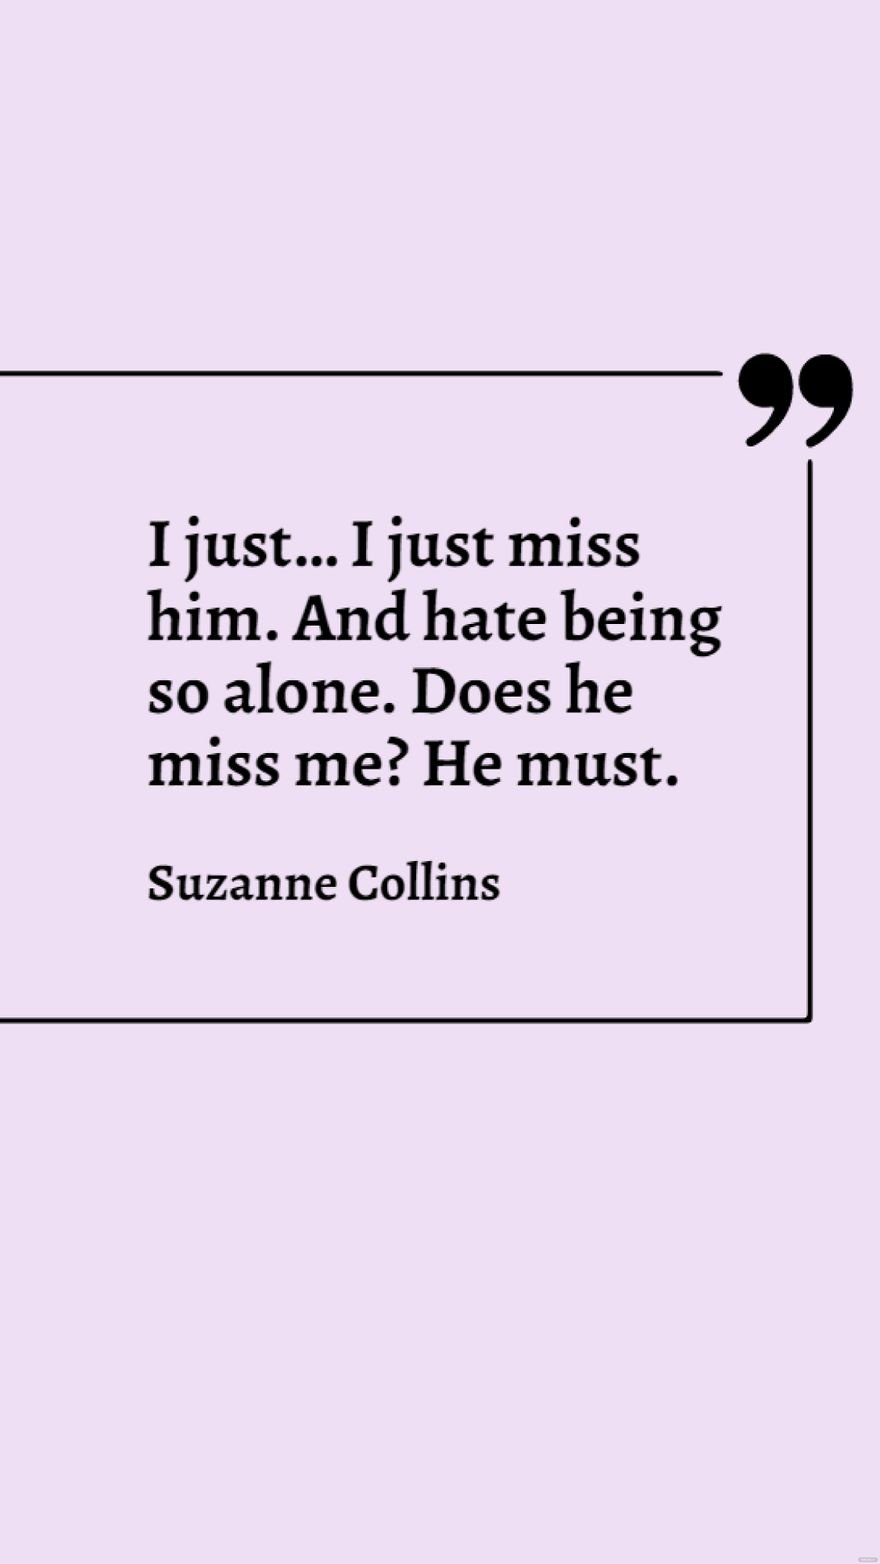 Suzanne Collins - I just… I just miss him. And hate being so alone. Does he miss me? He must.